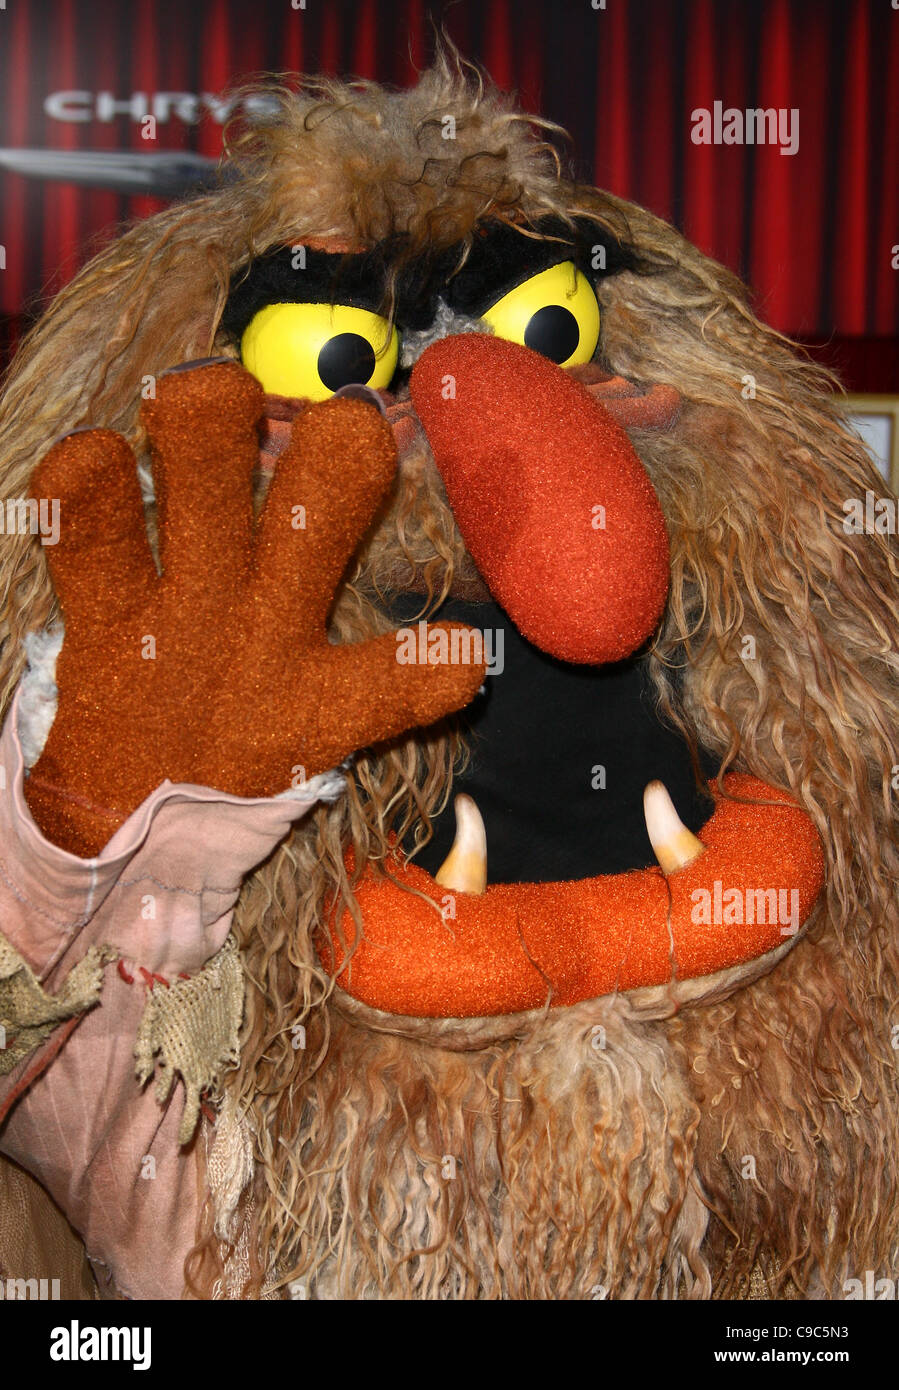 SWEETUMS THE MUPPETS. WORLD PREMIERE HOLLYWOOD LOS ANGELES CALIFORNIA USA 12 November 2011 Stock Photo